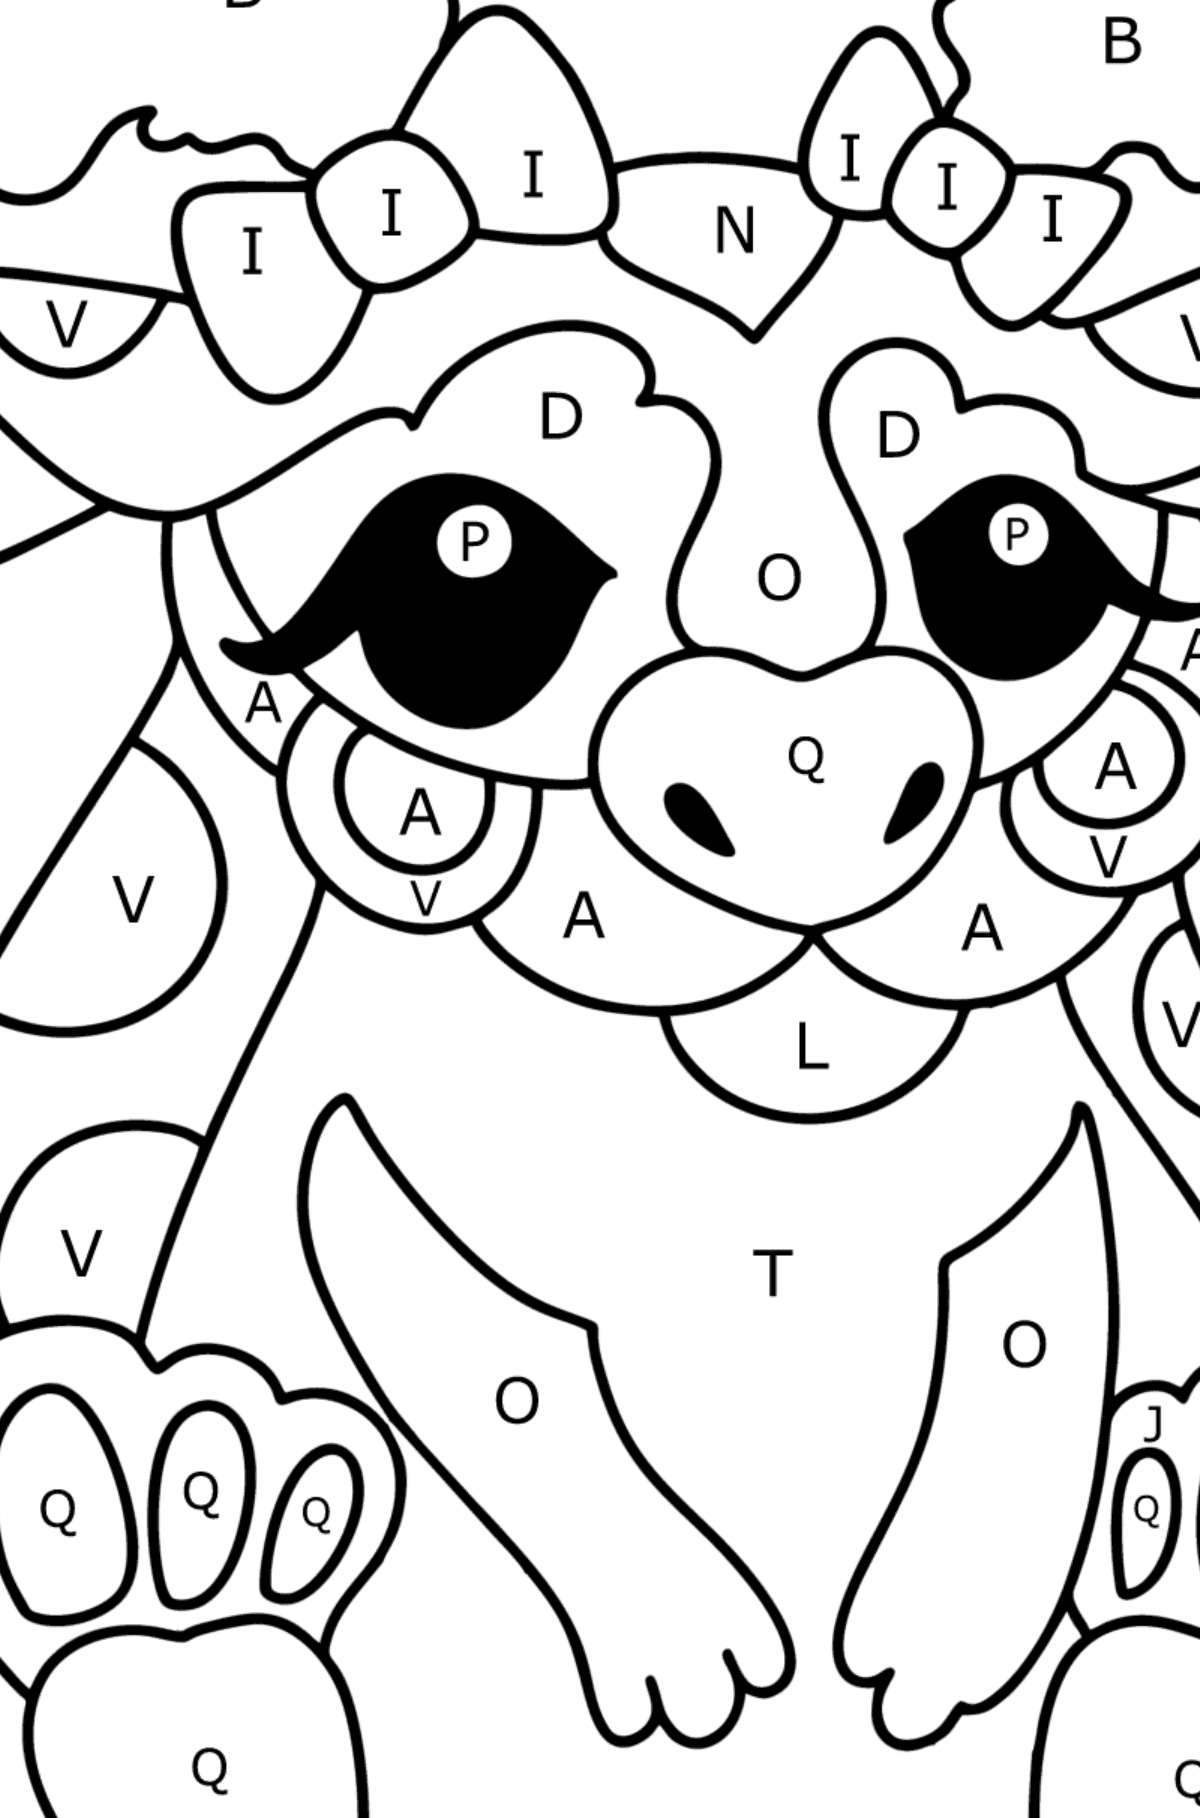 Dragon girl coloring page - Coloring by Letters for Kids